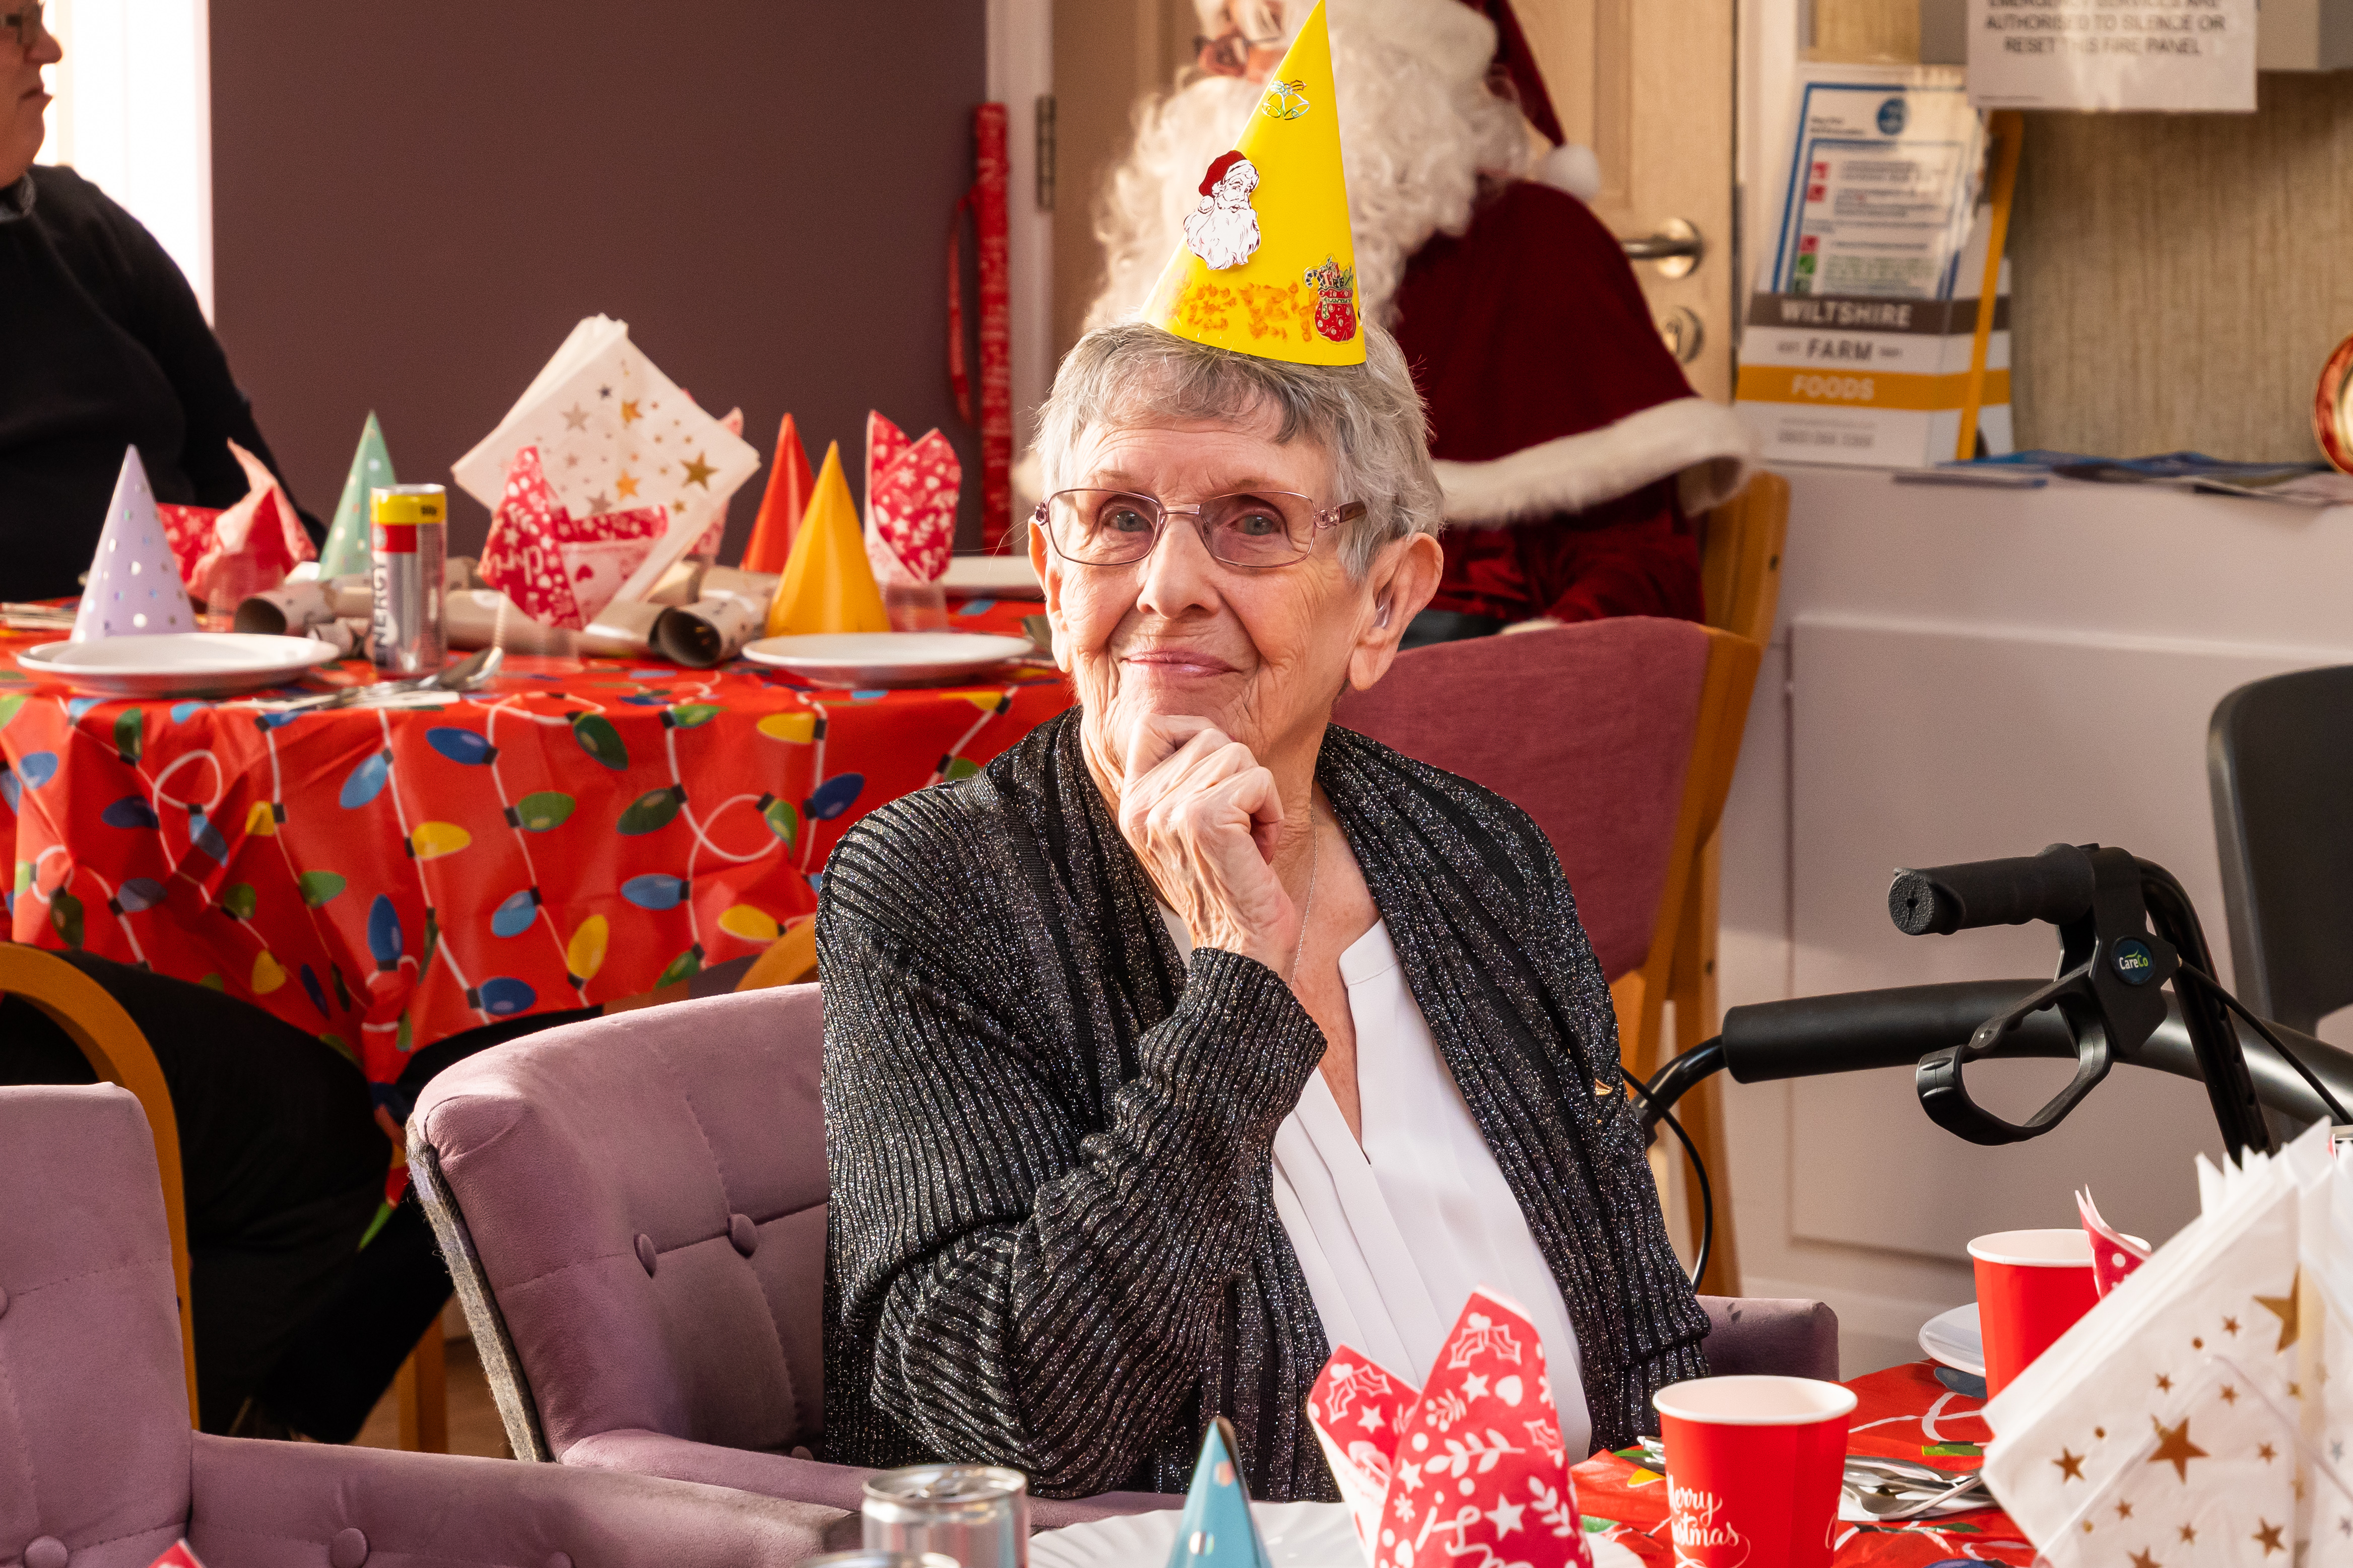 Smiling retirement living resident wearing party hat, sat at table with Christmas decorations 